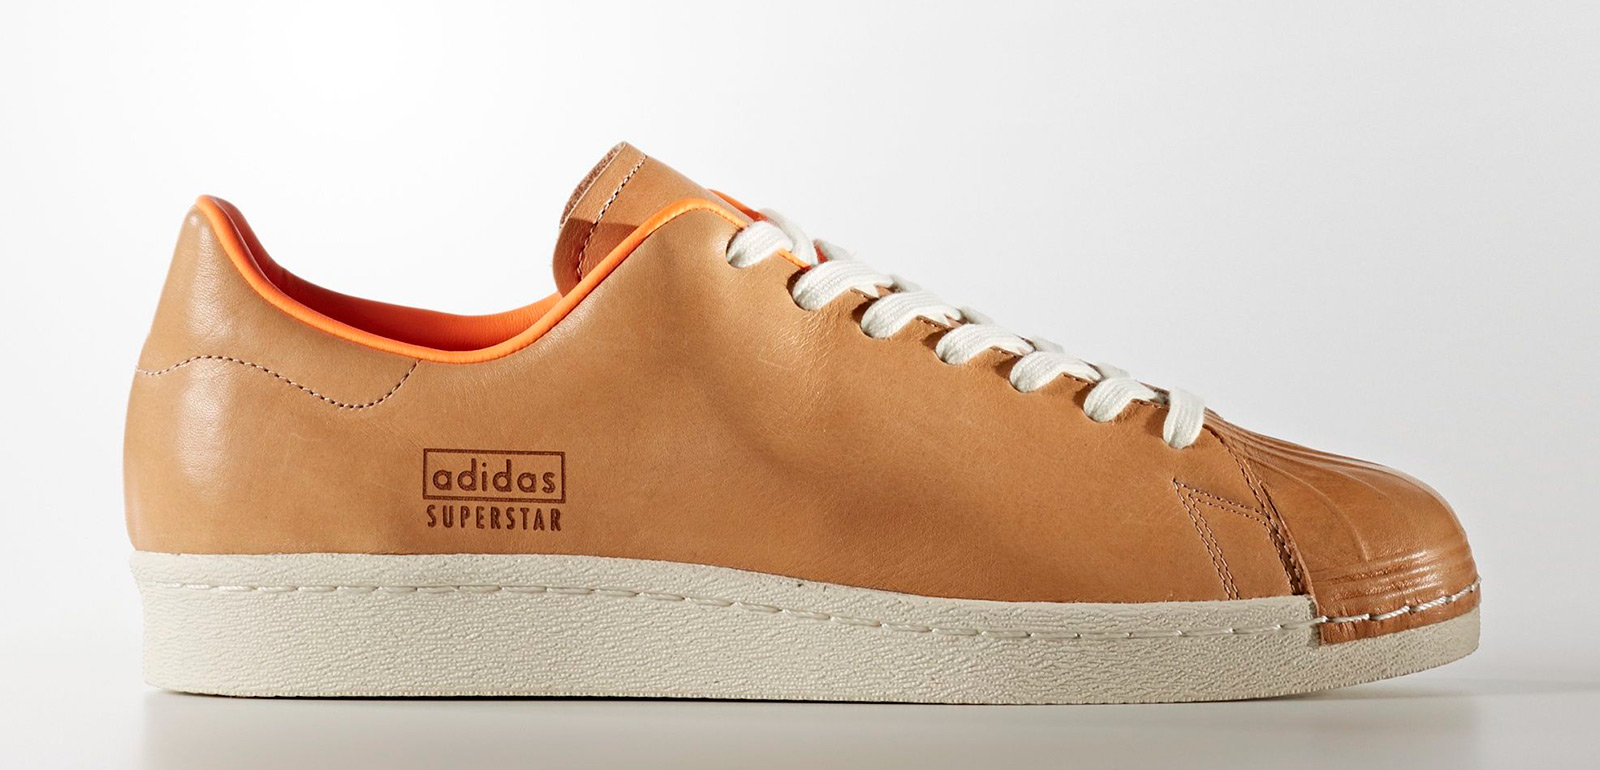 adidas Superstar 80s "Clean Shoes" -